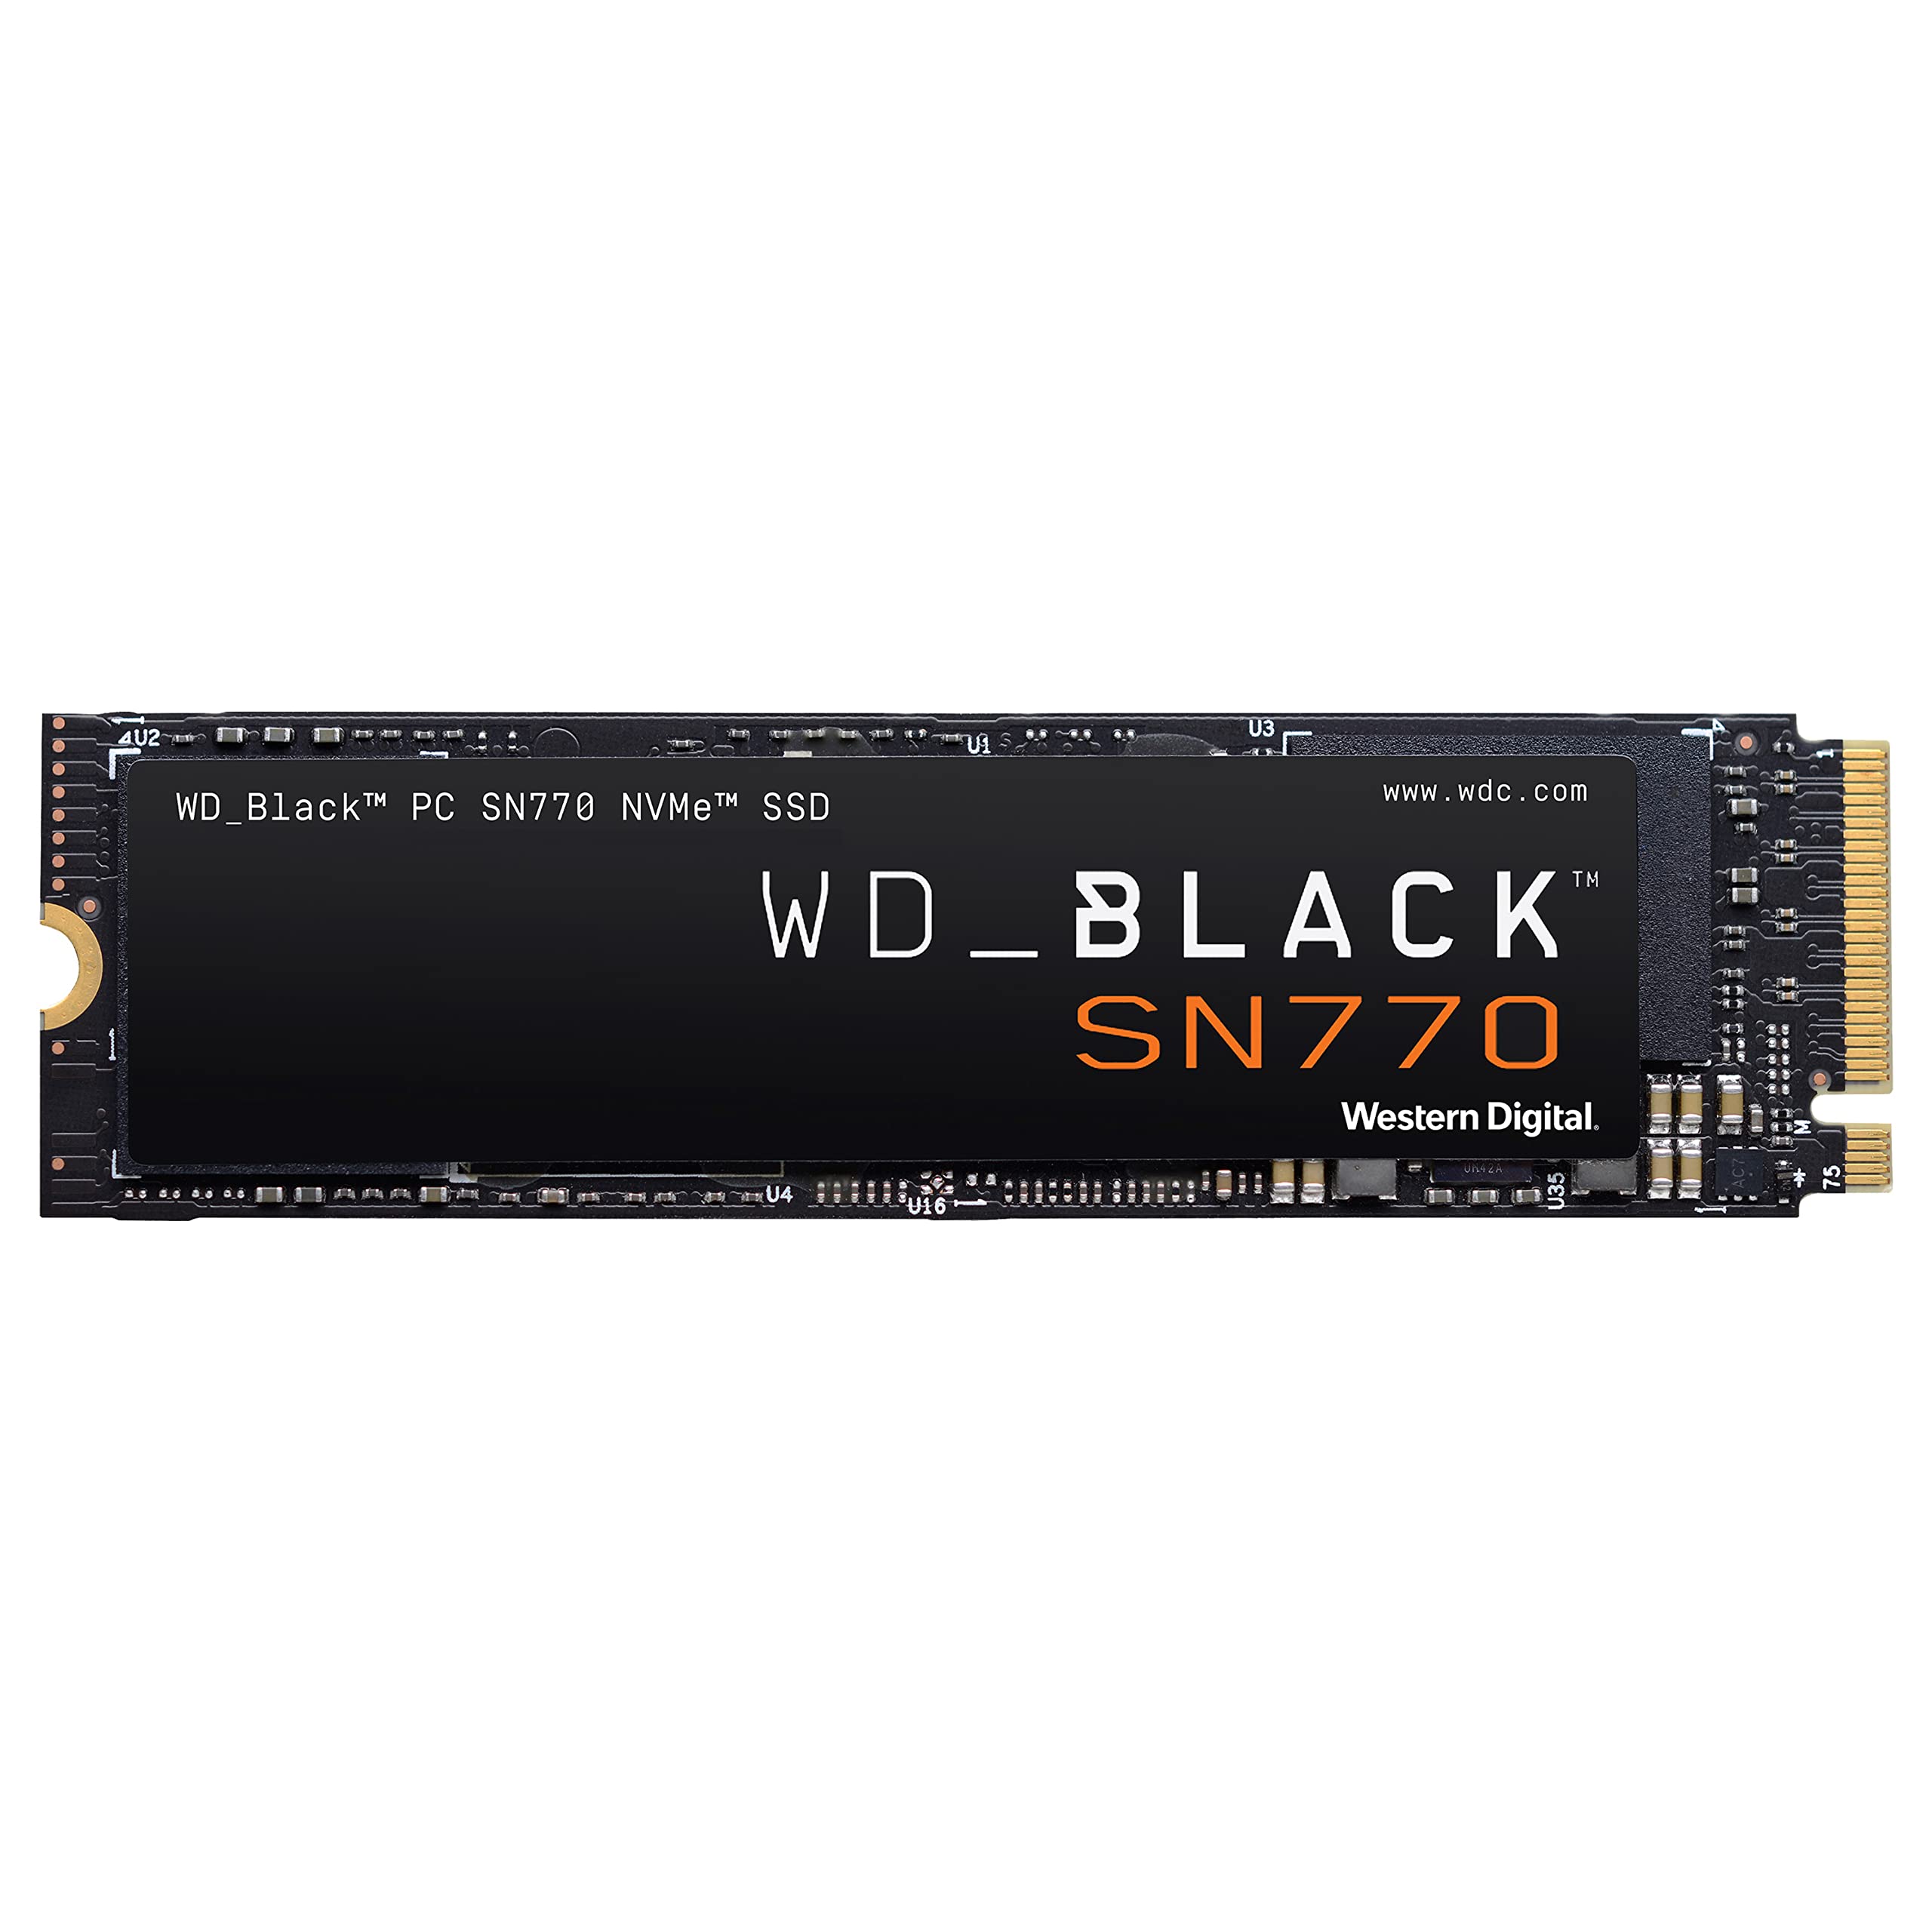 WD_BLACK 1TB SN770 NVMe Internal Gaming SSD Solid State Drive - Gen4 PCIe, M.2 2280, Up to 5,150 MB/s - WDS200T3X0E $50.99